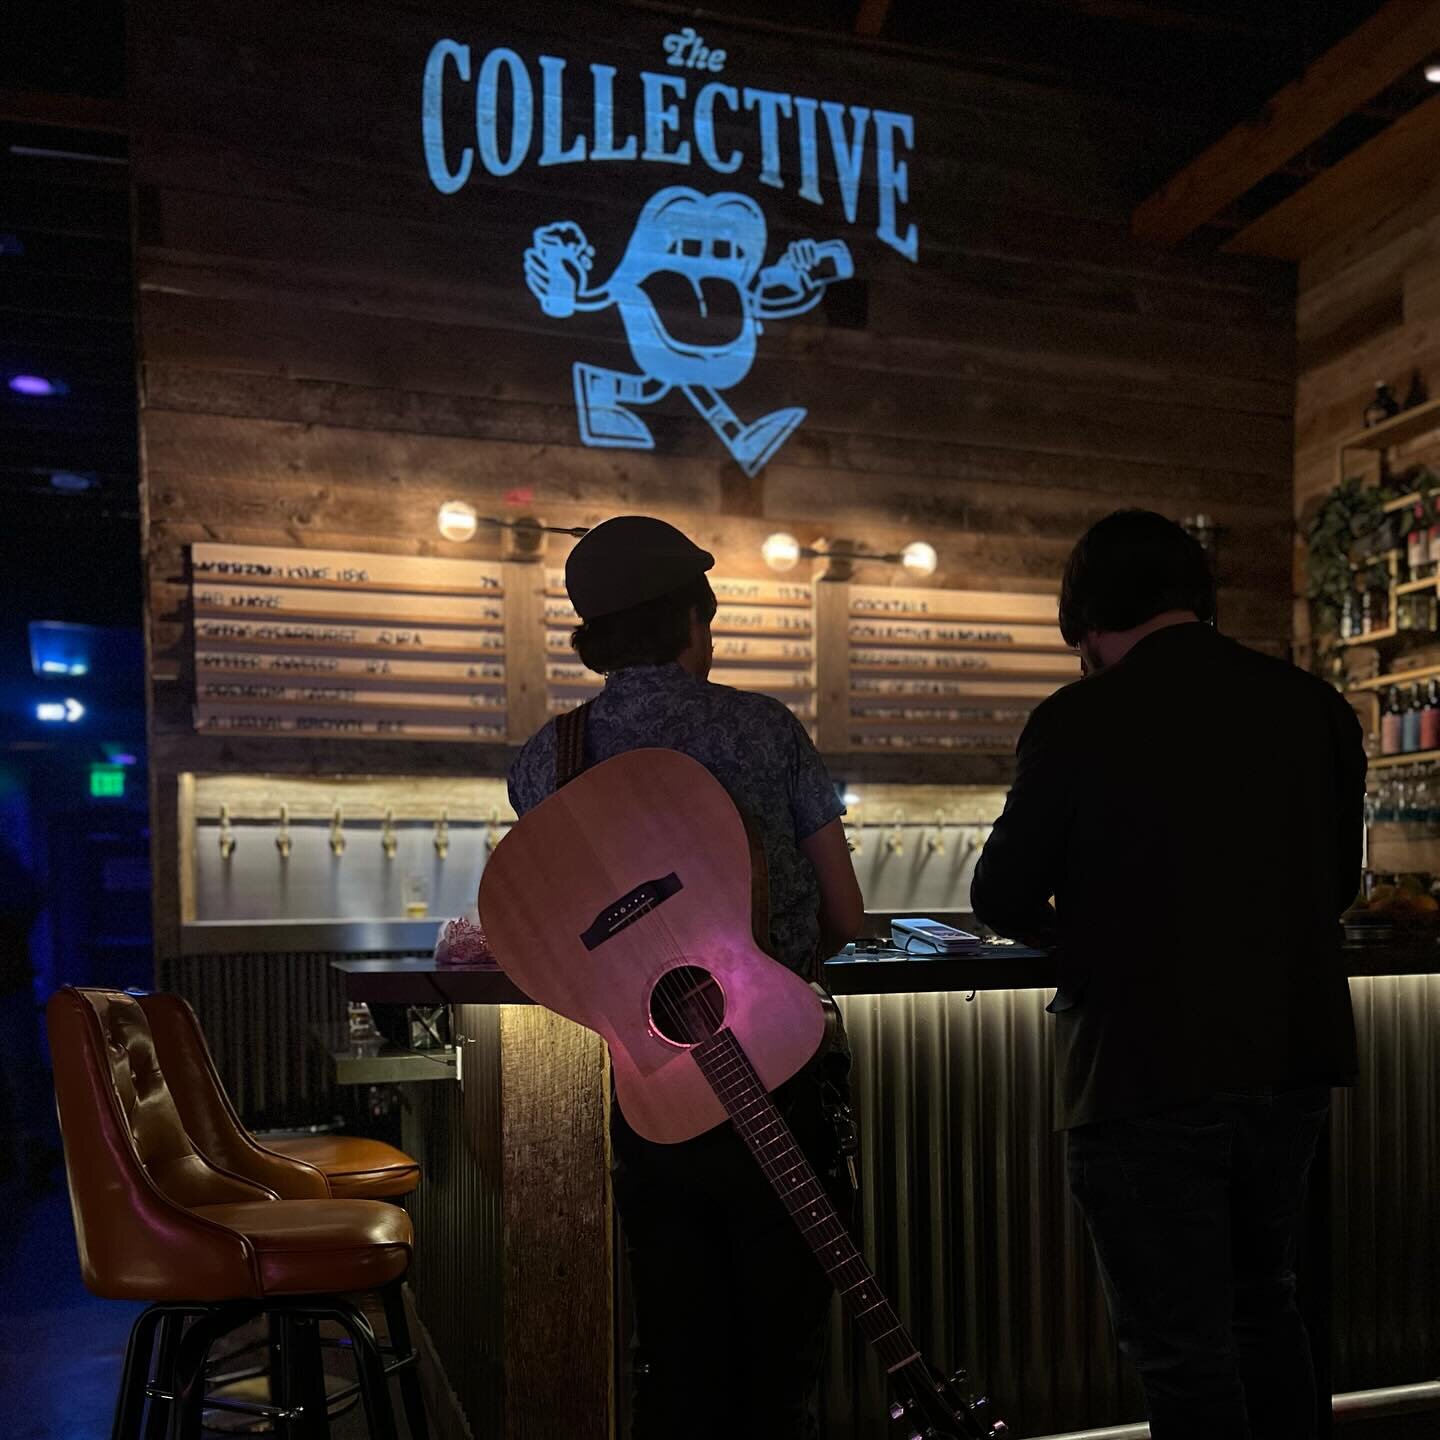 We LOVE live music here at The Collective! 🎸 MUSICIANS, come practice your material or network with other musicians and create together!! Wednesdays is our JAM NIGHT! 

Bring your own instrument, we&rsquo;ll see you on Wednesdays!! 

#music #sandieg